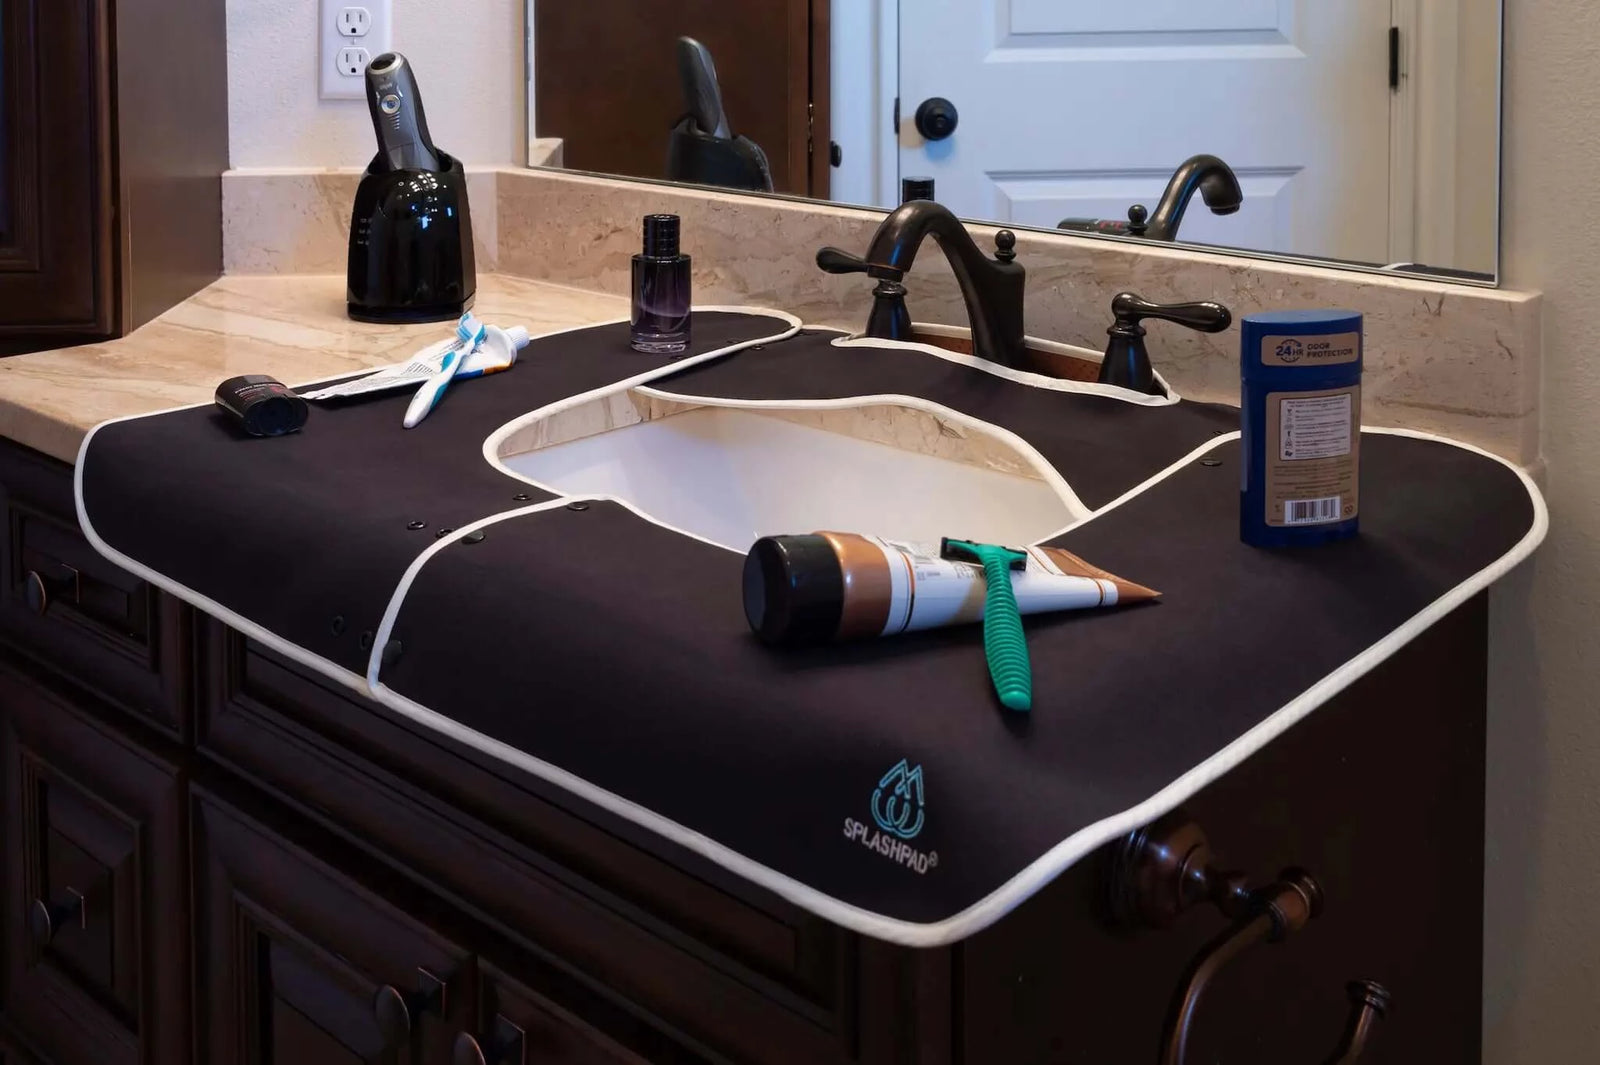 Black Bathroom Splashpad Mat Protects Marble Countertop from Water Splashes While Shaving and Grooming